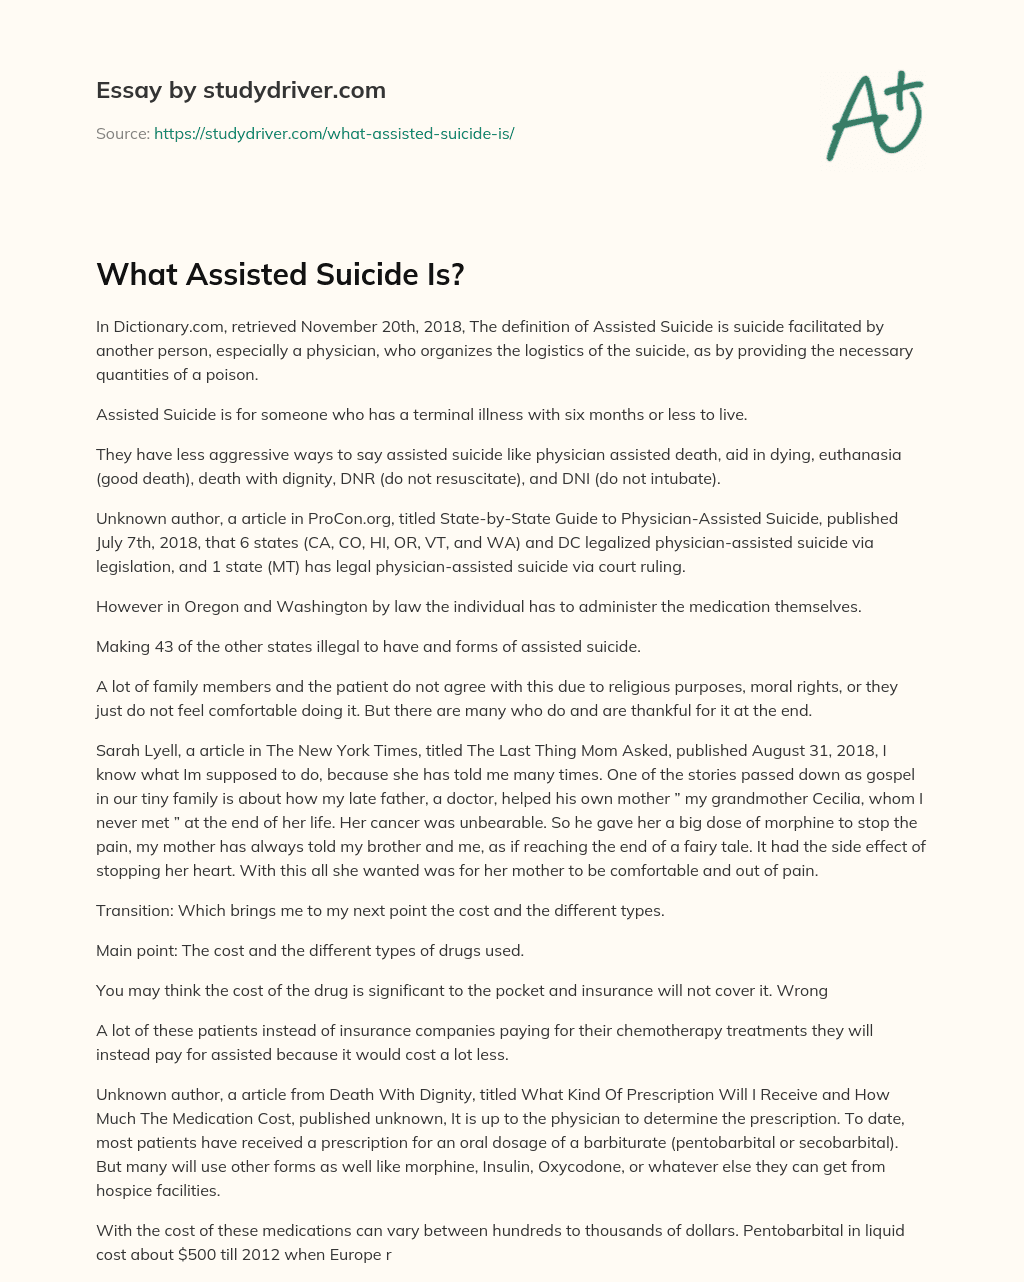 What Assisted Suicide Is? essay